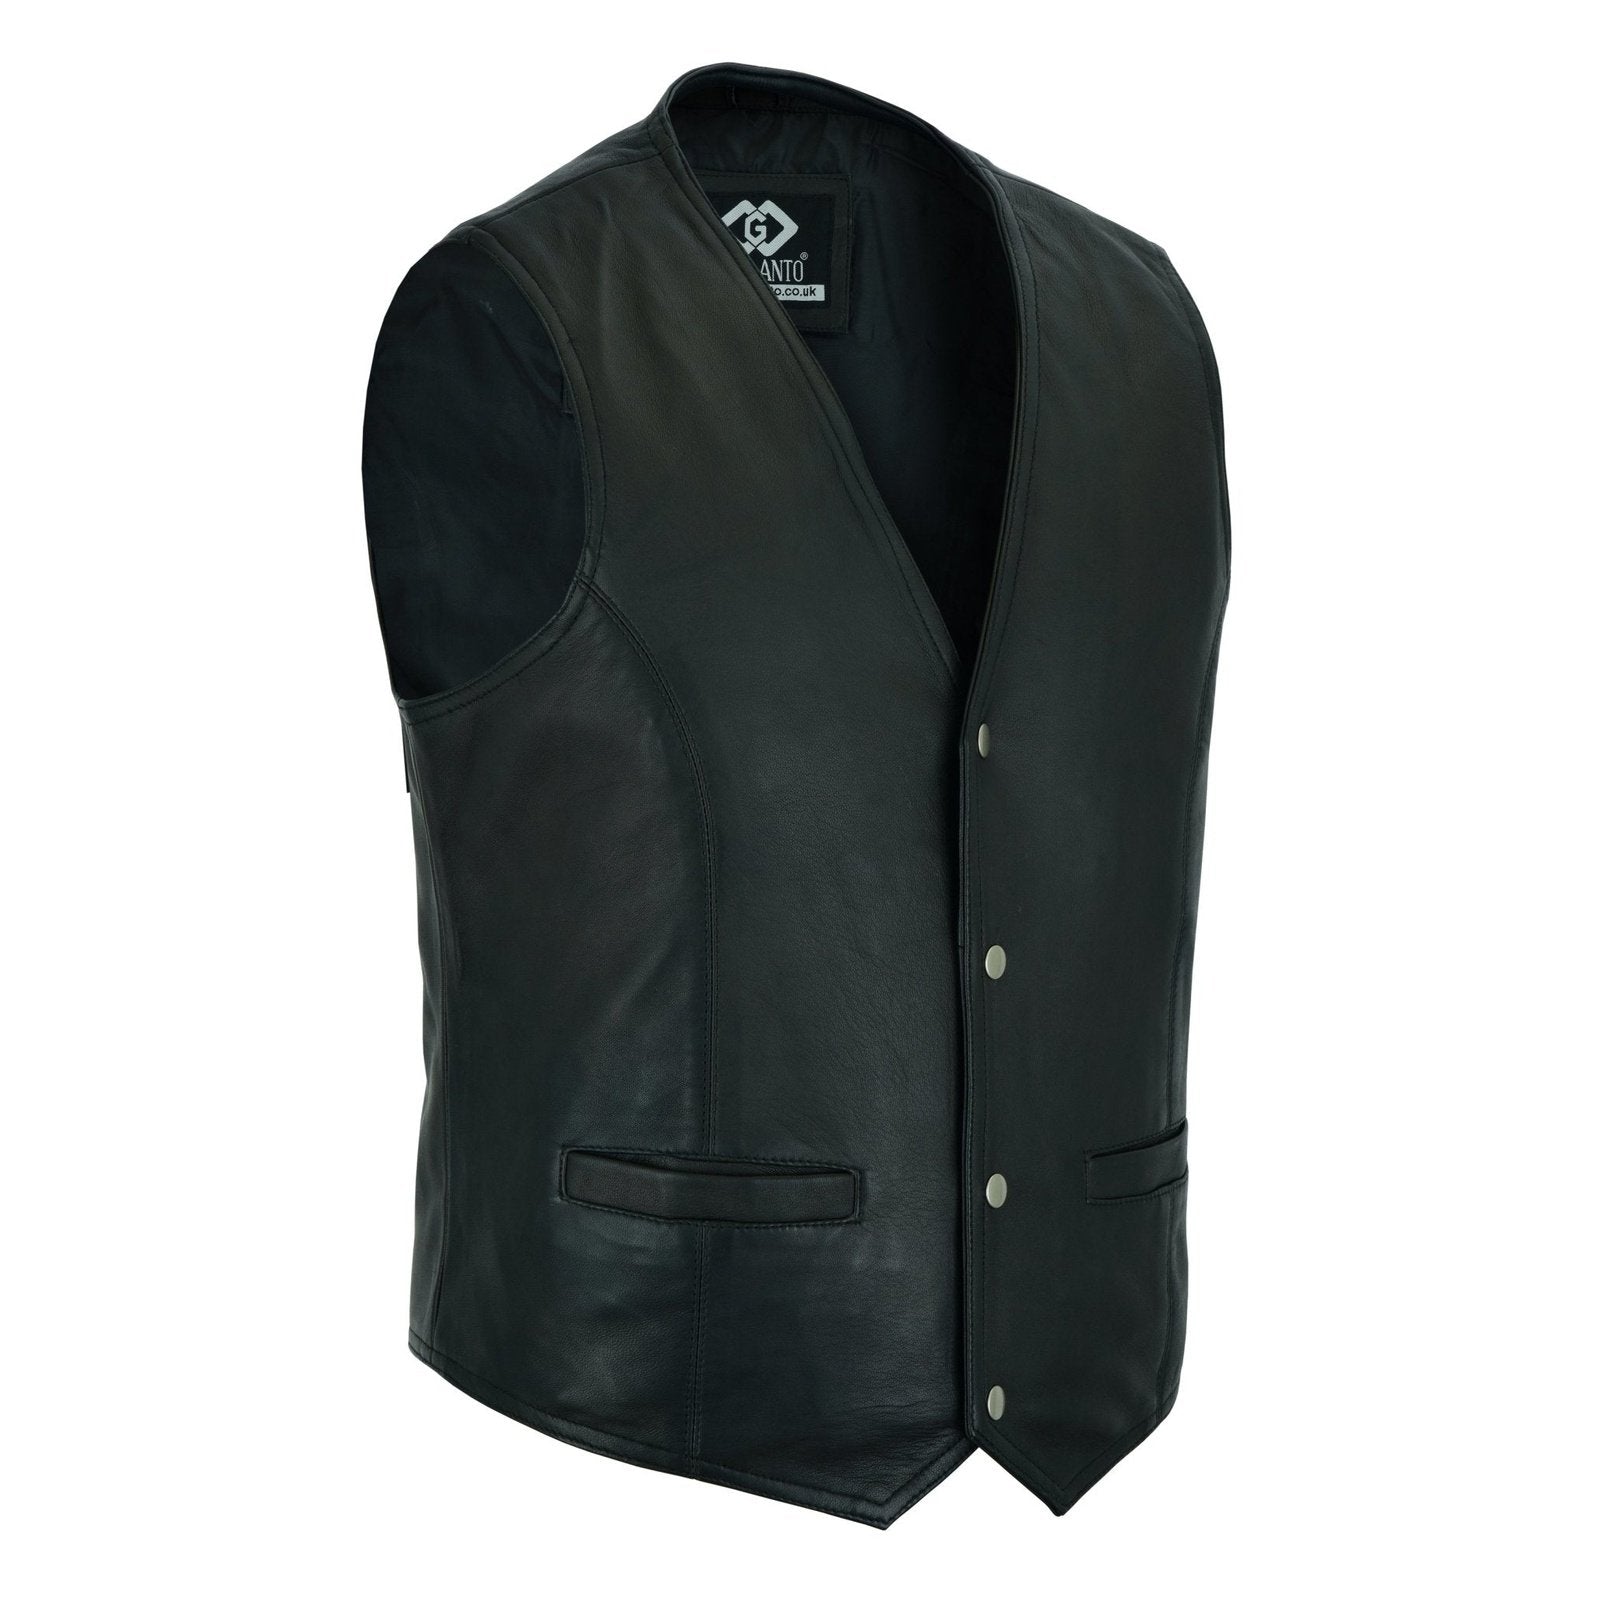 Mens black leather waistcoat vest with snap button